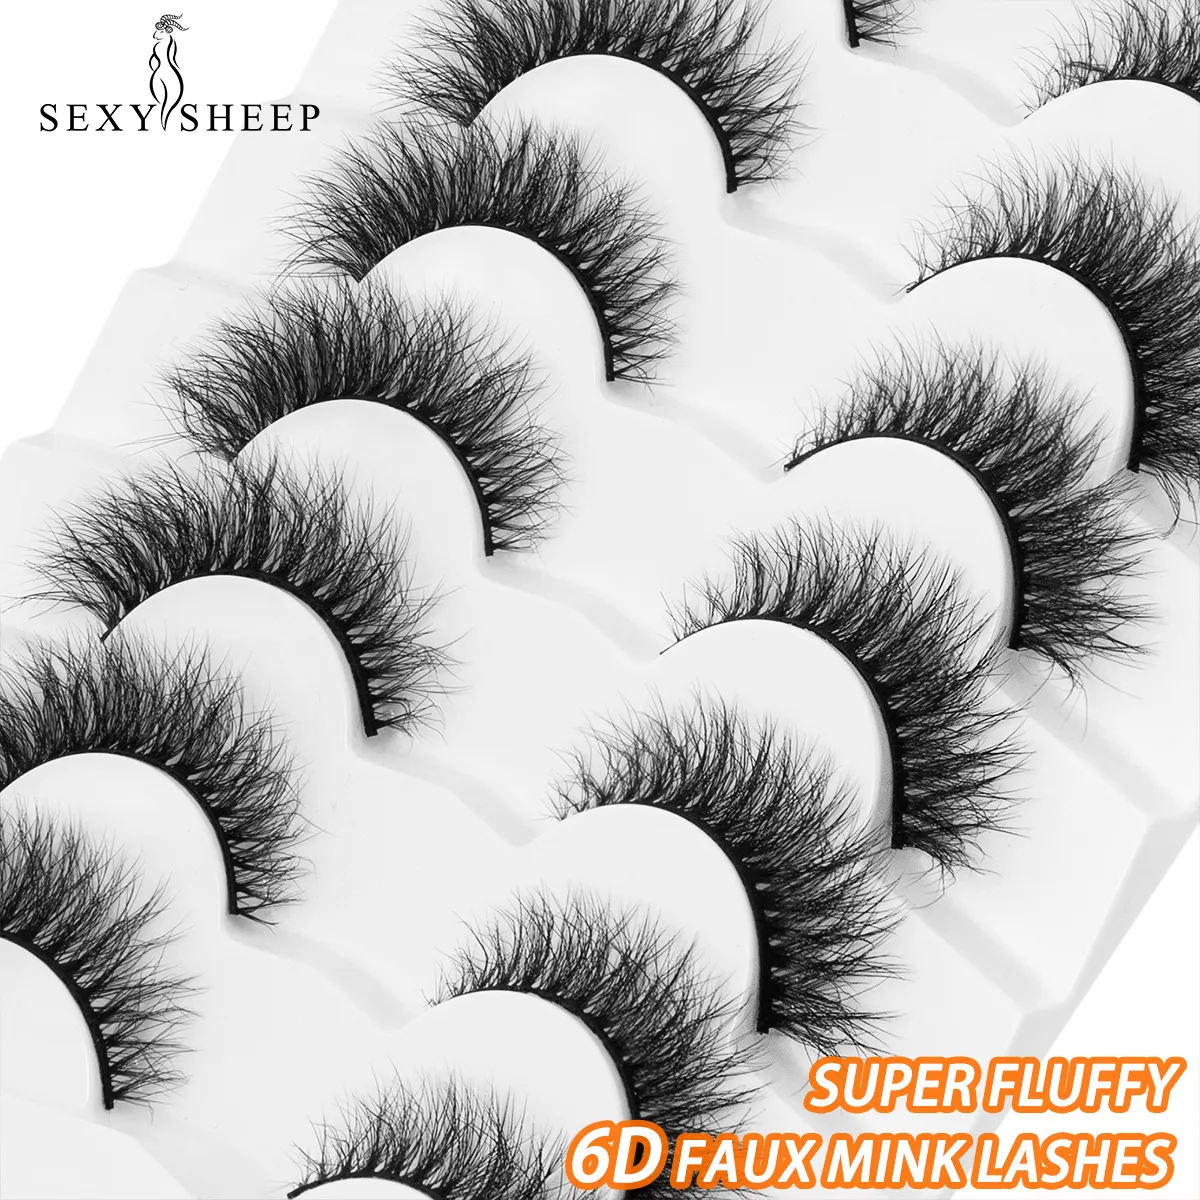 Outils de maquillage SEXYSHEEP False Eyelashes 6D Super Fluffy Wispy Faux Mink CatFox Eye Effect Dramatic Lashes Extension de cils 230425